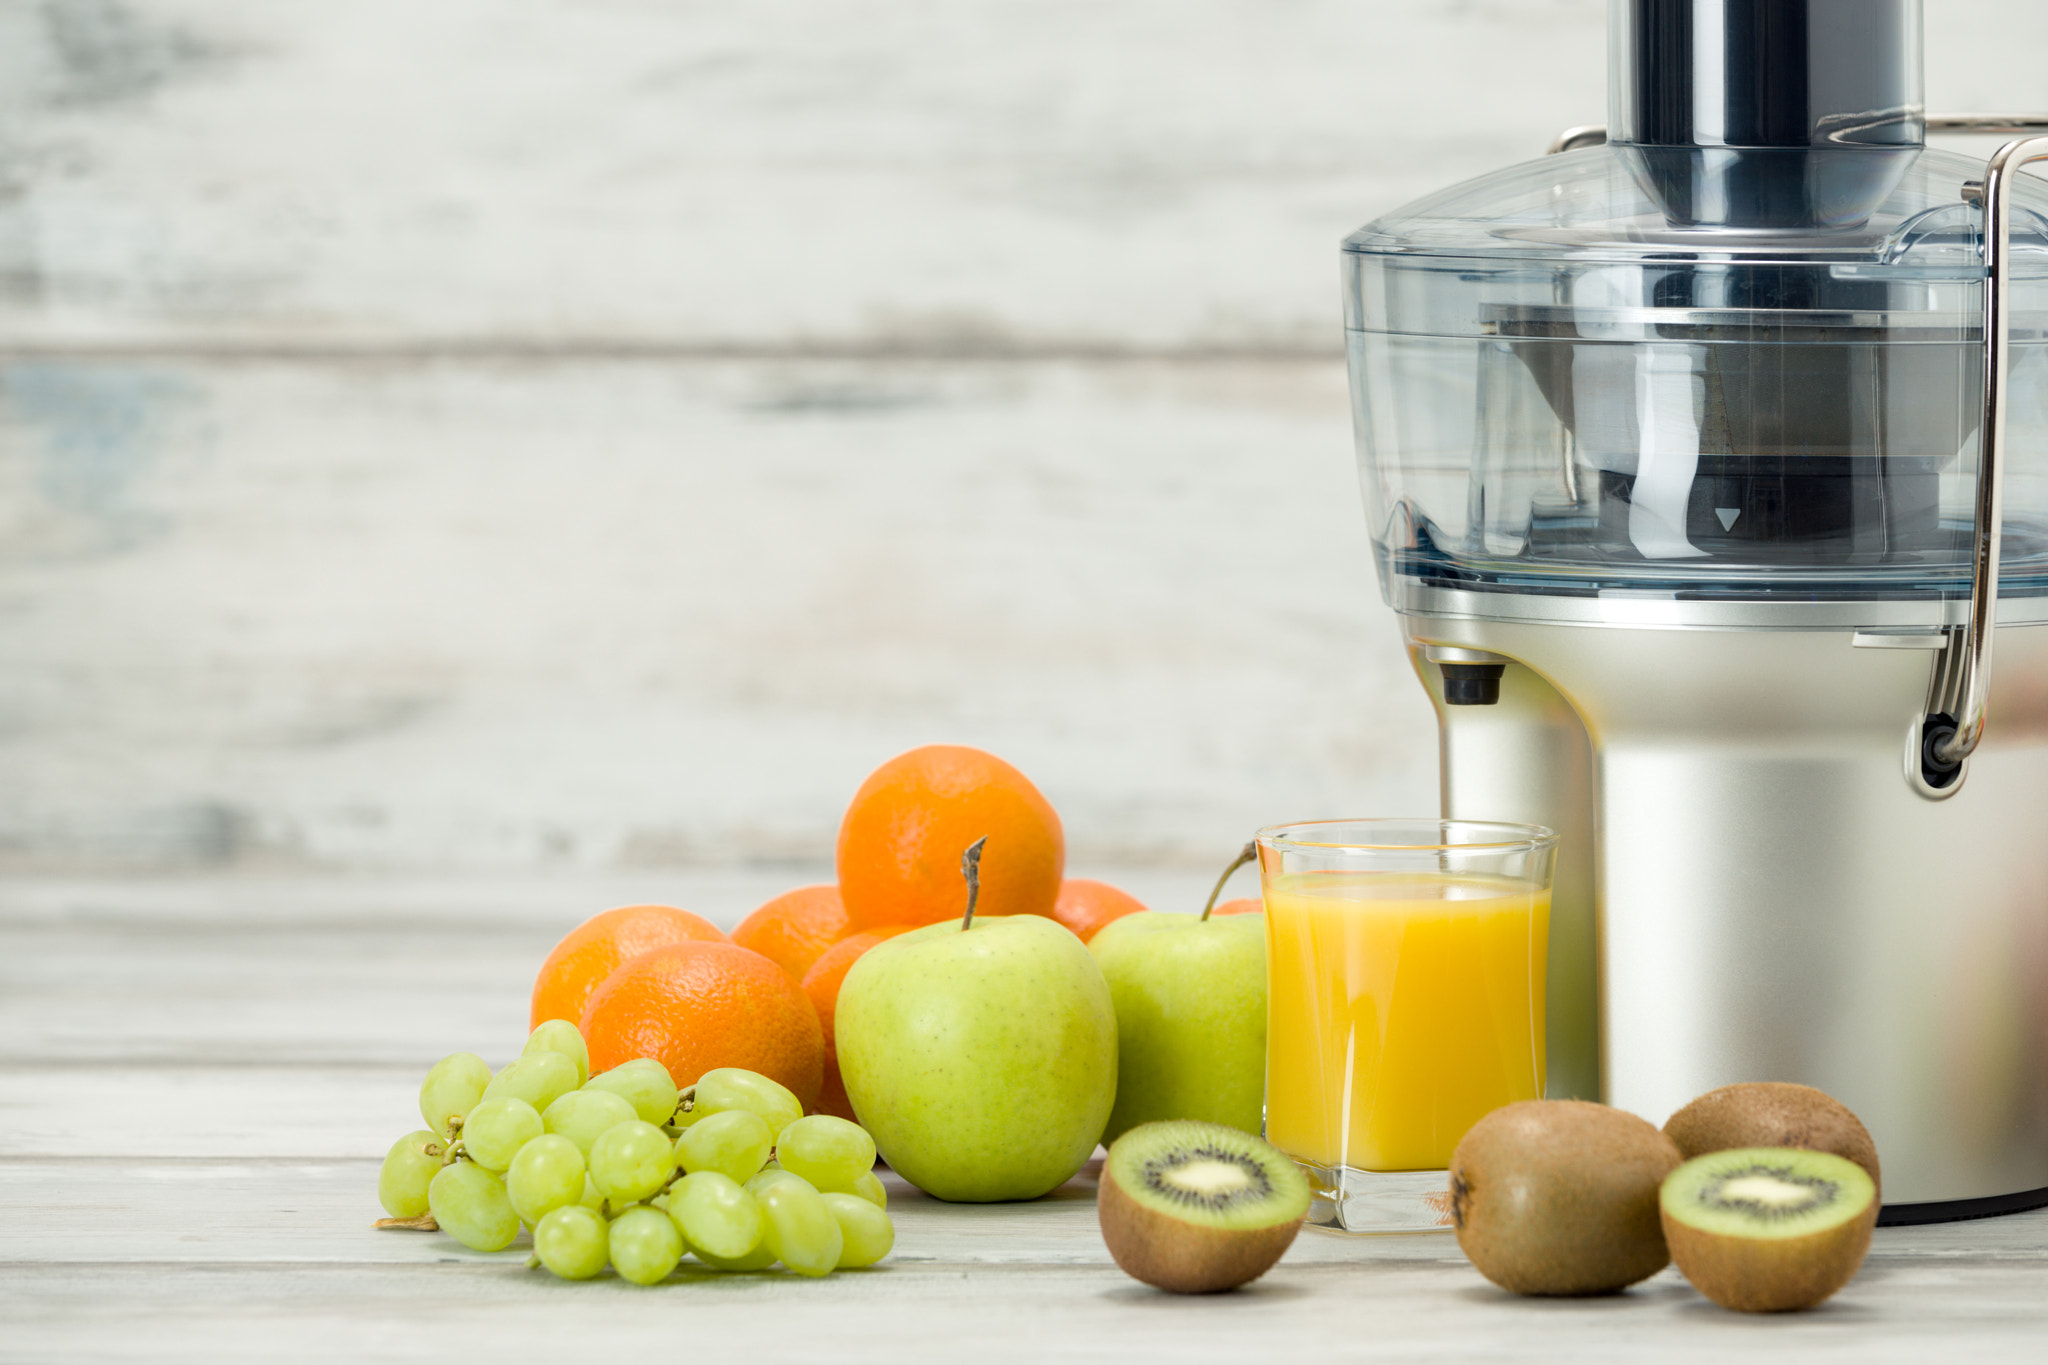 Nikon D810 sample photo. Modern electric juicer, various fruit and glass of freshly made juice, healthy lifestyle concept photography